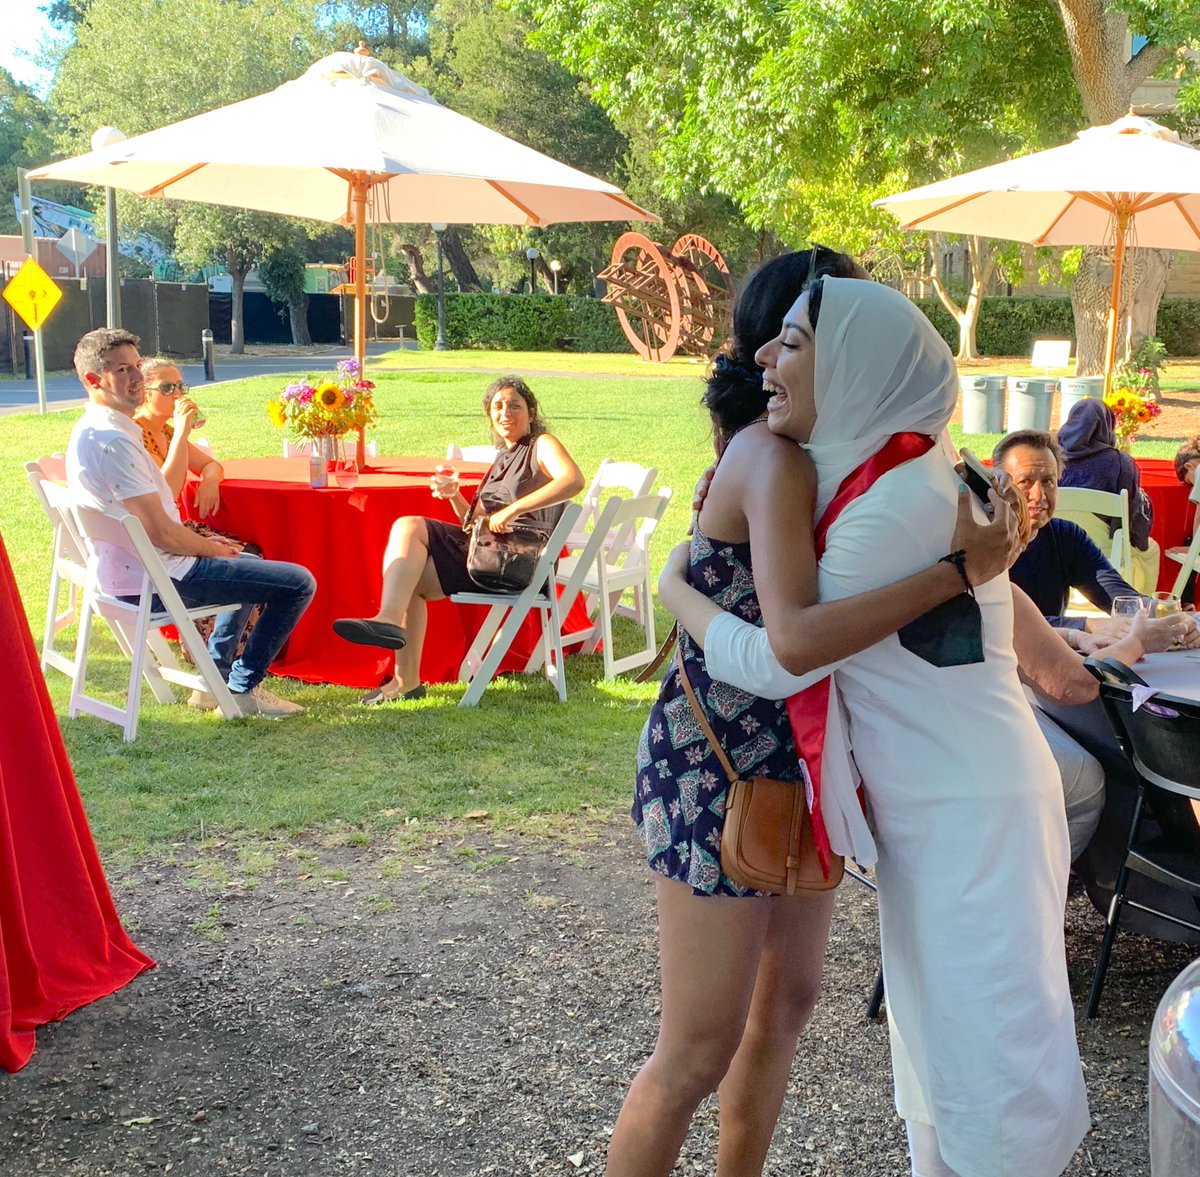 We were so fortunate to see grads from our classes of '20 and '21 during commencement weekend! It was lovely to catch up and meet their loved ones over dinner. Pictured: Shikha Srinivas (L) and Mariam Noorulhuda (R) embrace while Hadil Al-Mowafak and guests look on.